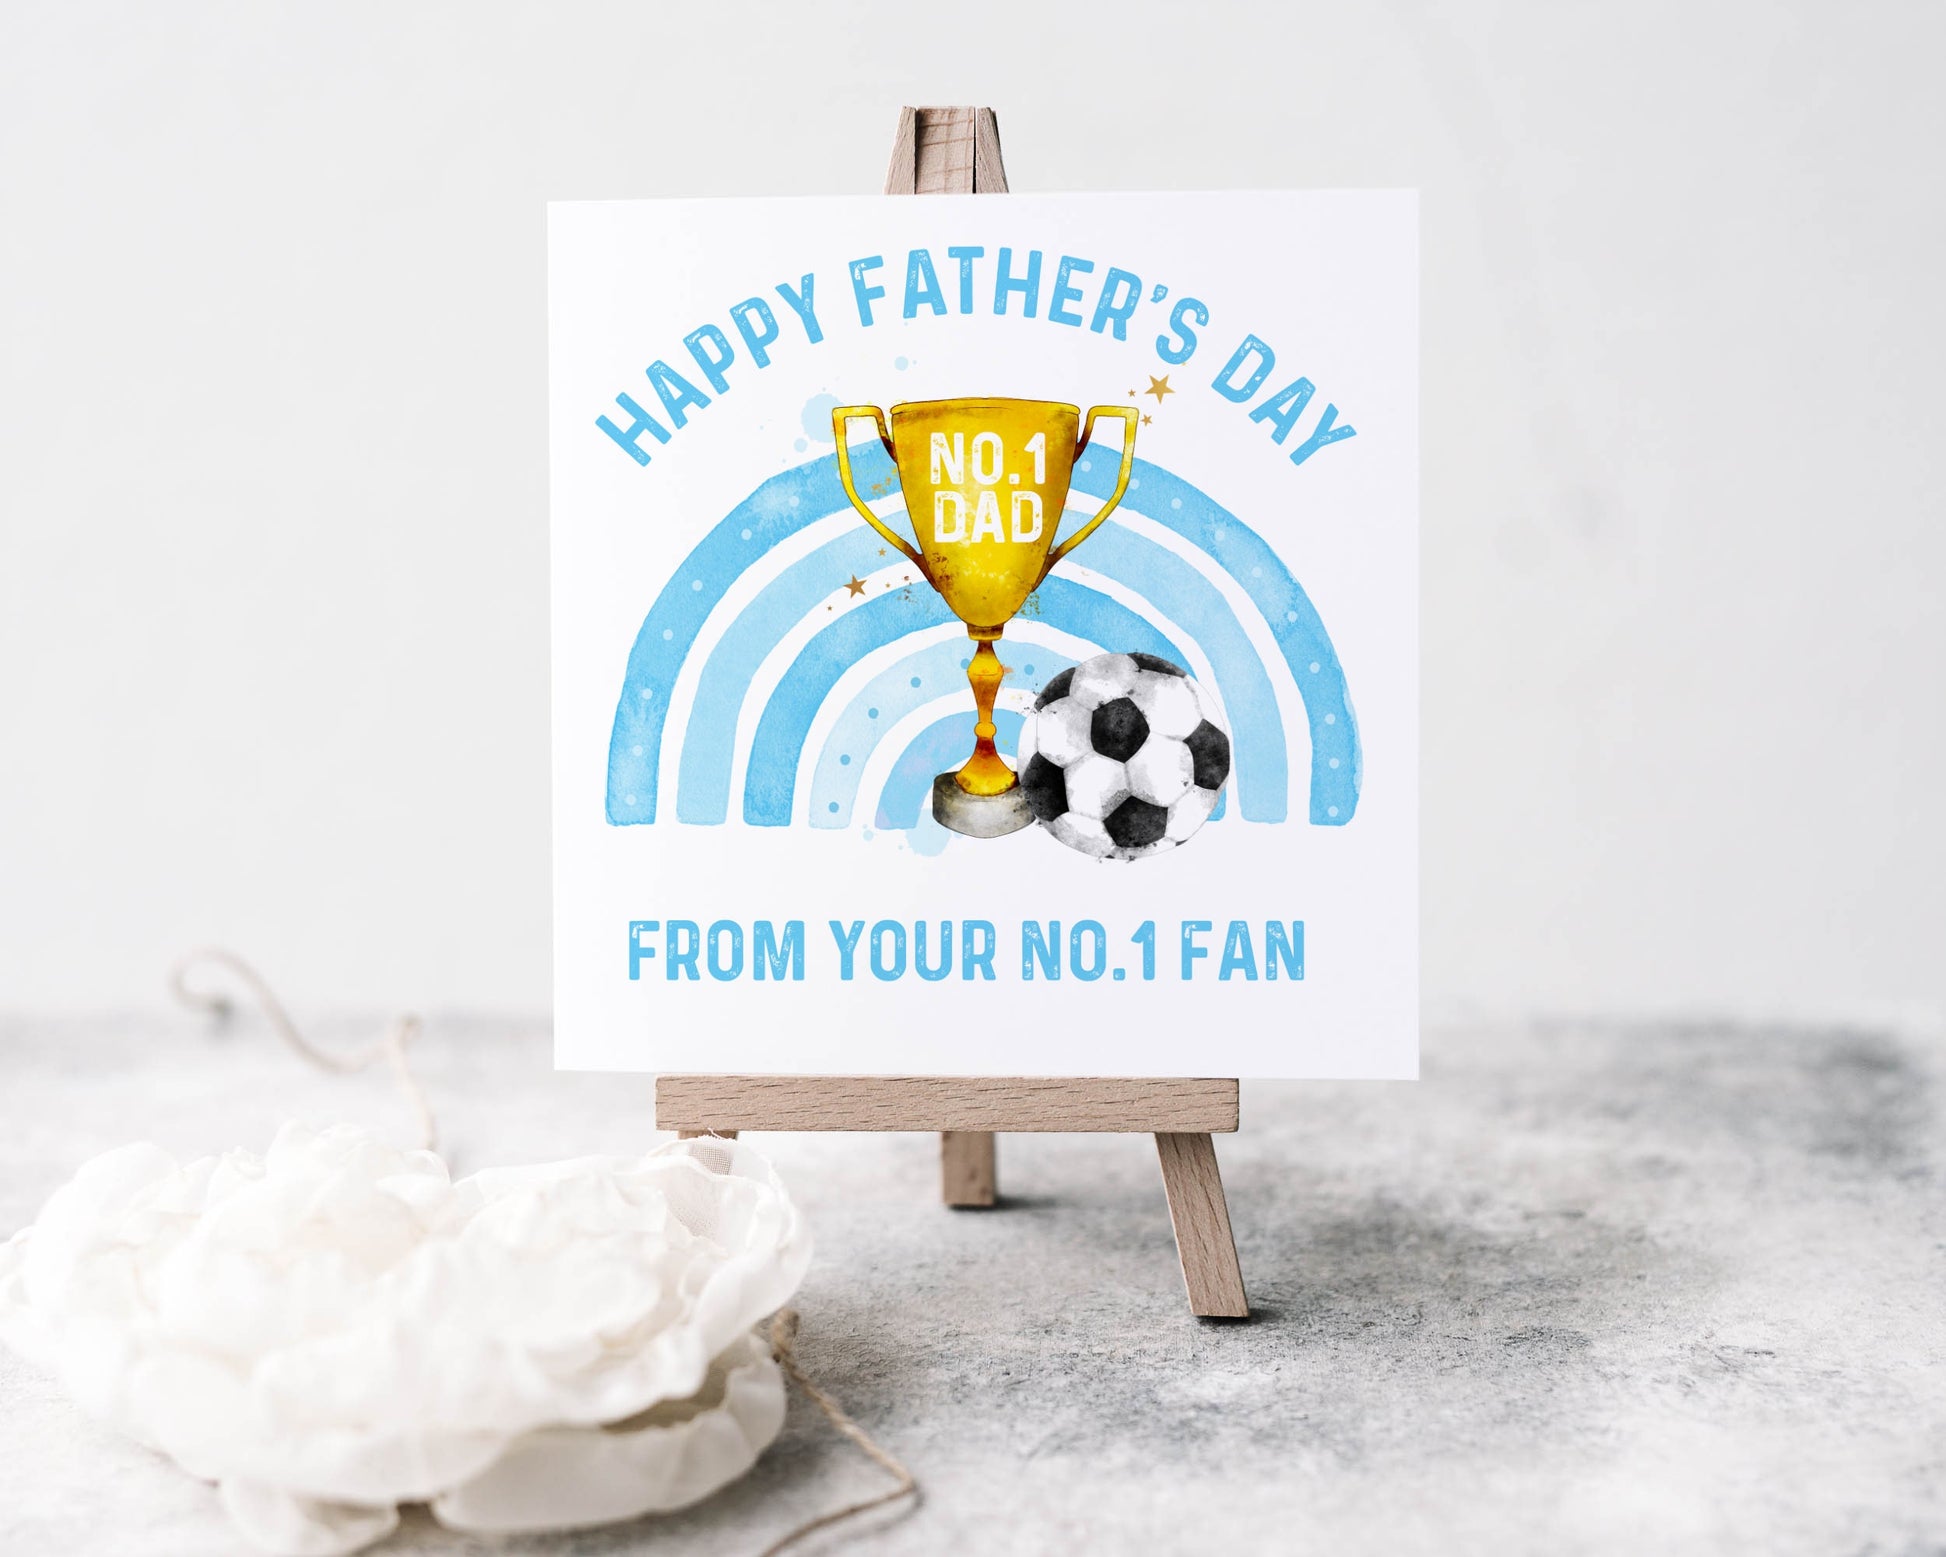 Father's day greeting card, the design features a trophy, a blue rainbow and a football, text reads 'Happy Father's Day from your no.1 fan'